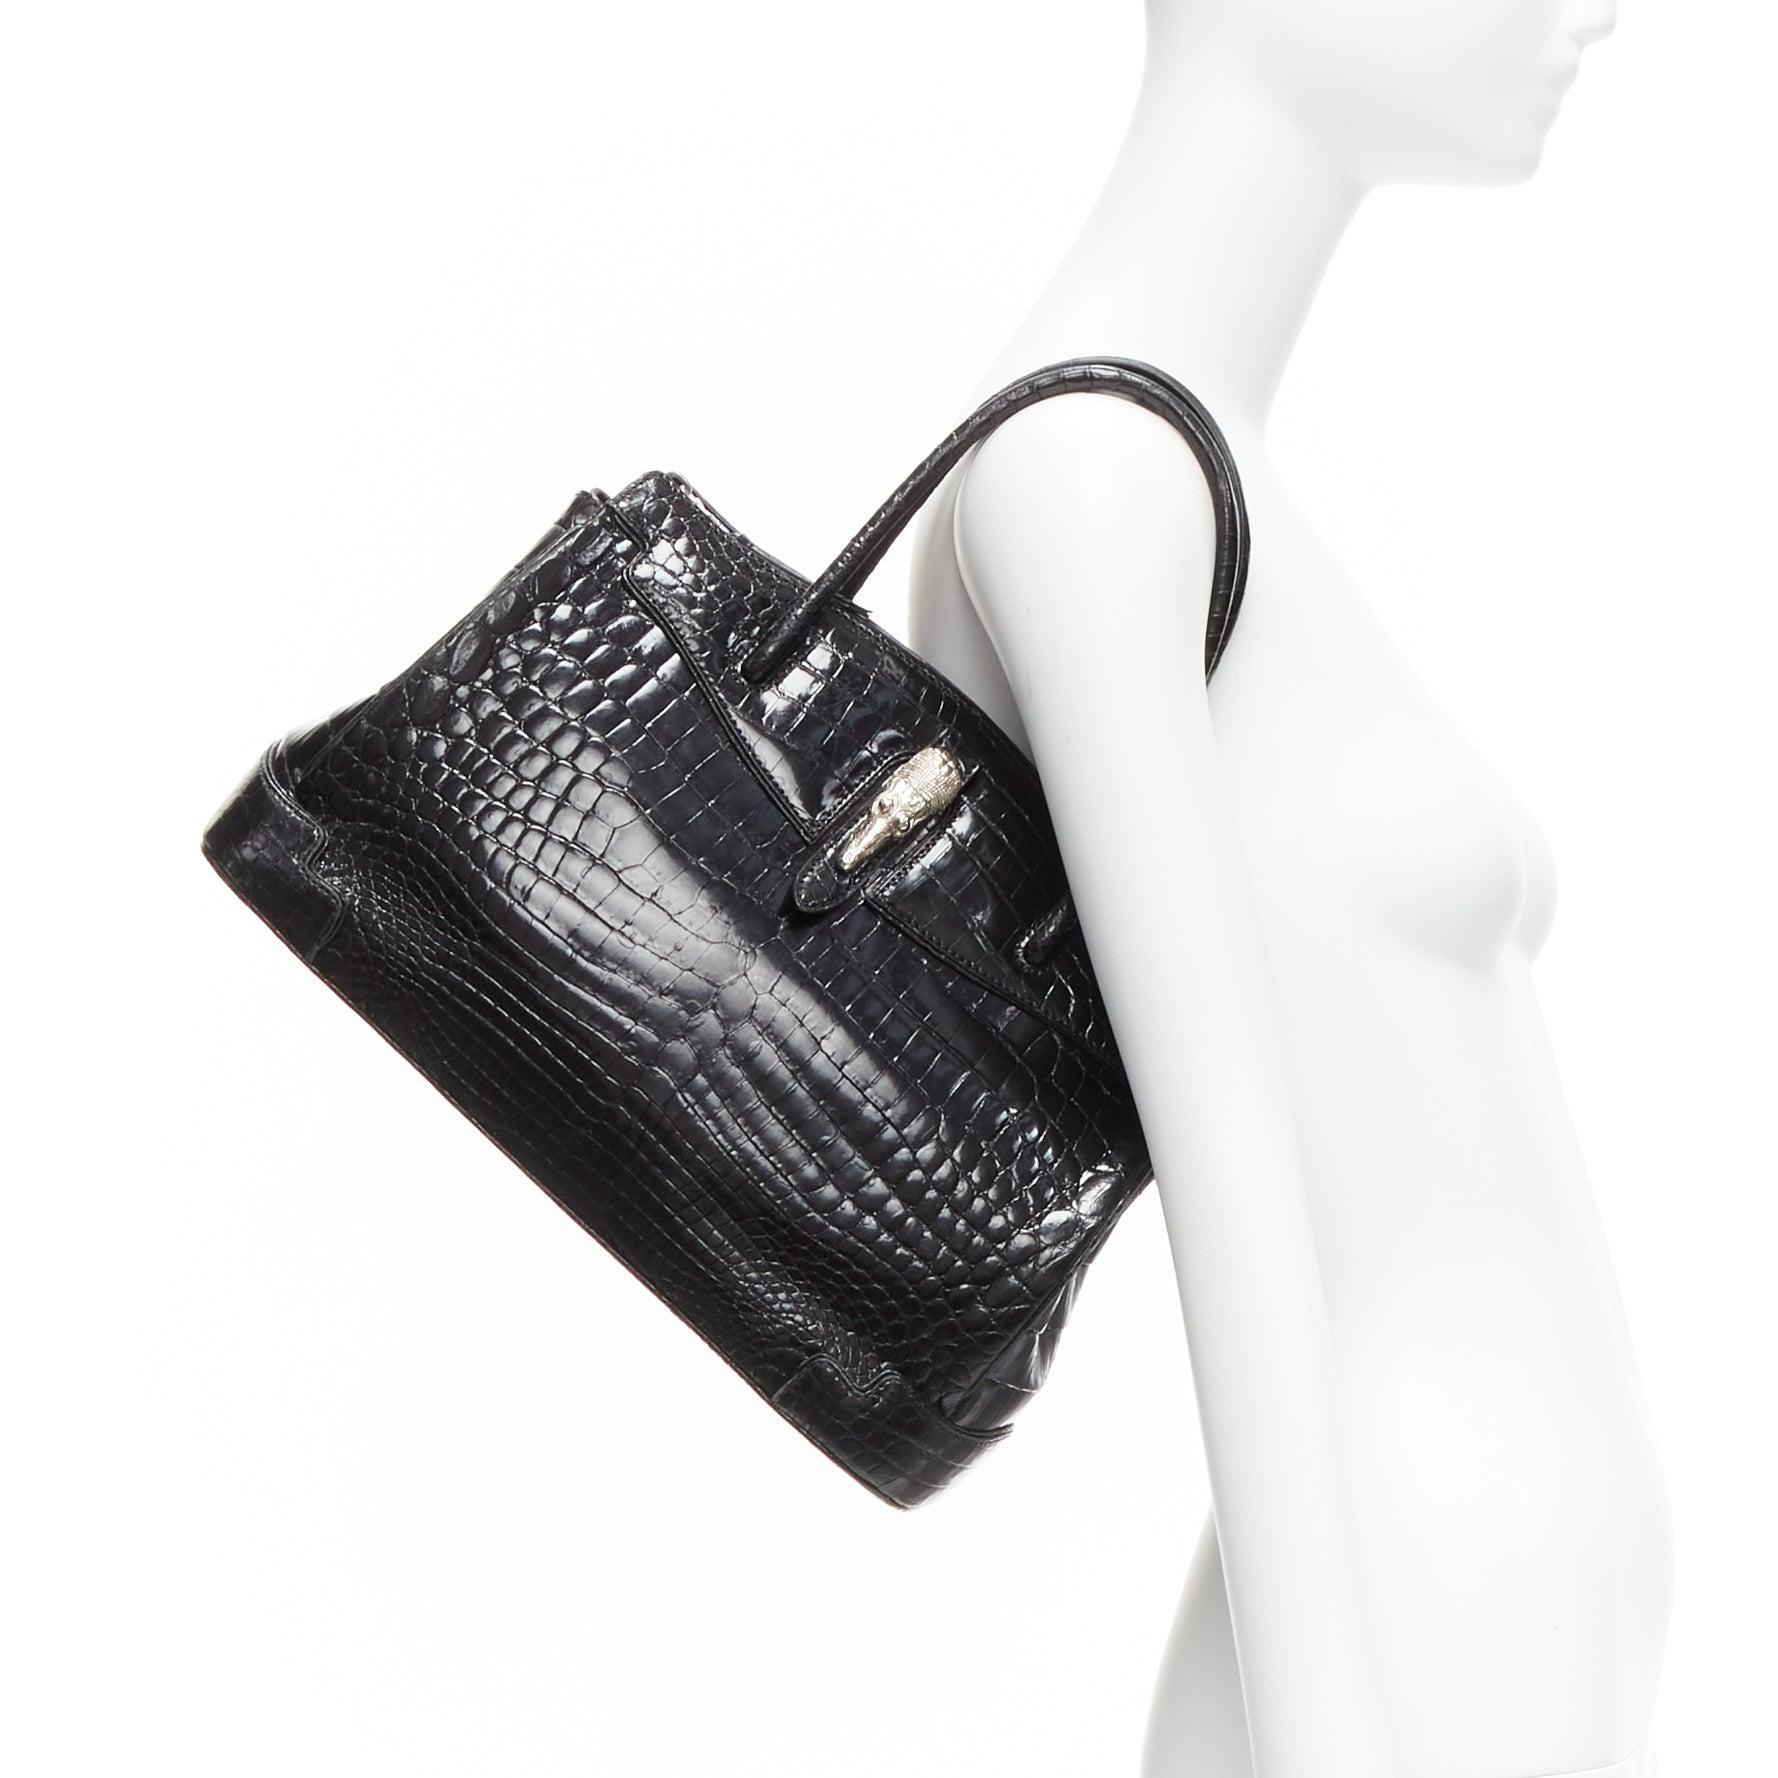 KWANPEN black polished scaled leather silver animal buckle executive tote bag
Reference: CELE/A00022
Brand: Kwanpen
Material: Leather
Color: Black
Pattern: Animal Print
Closure: Zip
Lining: Black Leather
Extra Details: Animal head